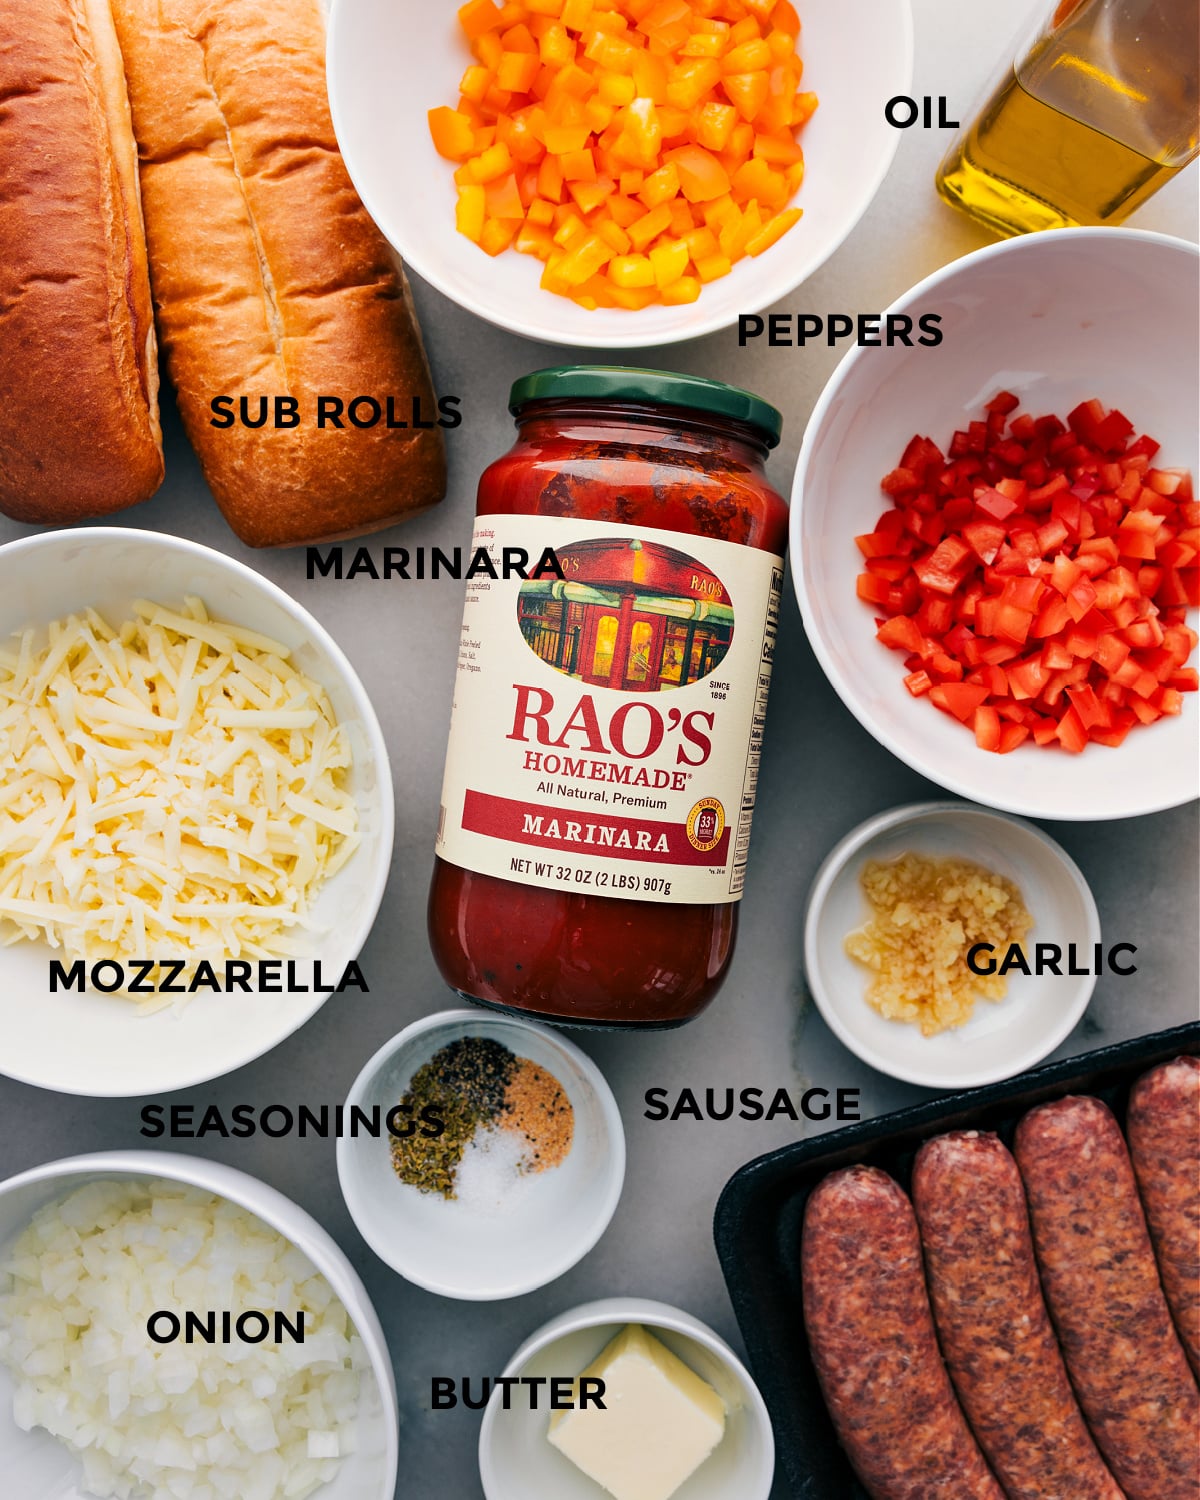 All the ingredients for this recipe prepped out for easy assembly, including peppers, rolls, marinara, mozzarella, onion, seasonings, sausage, garlic, and butter.